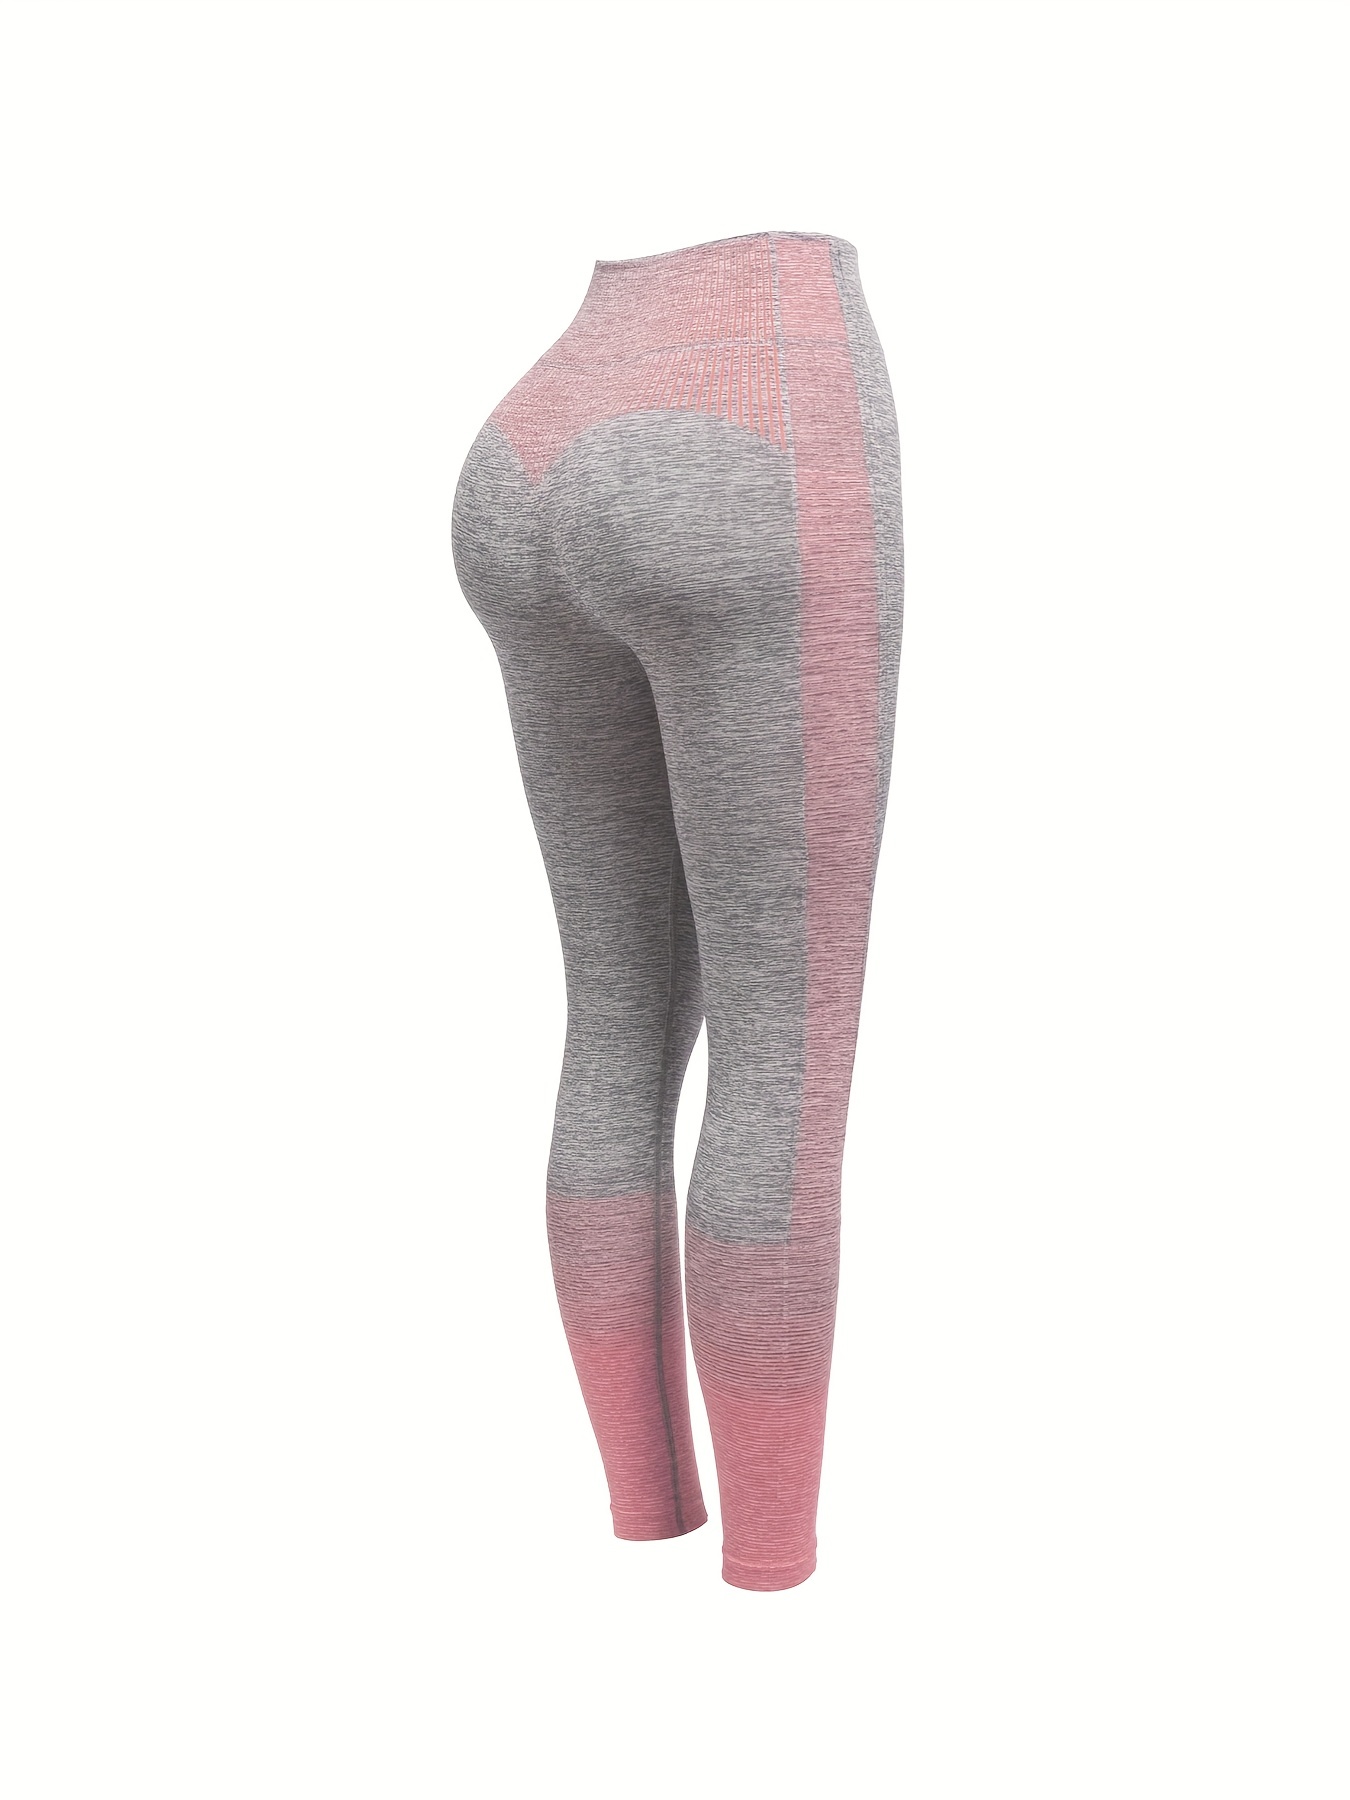 Leggings for Women Casual Solid Splice Pants Slim Elasticity Exercise  Fitness Pants Trousers (Pink-02#, XXL)